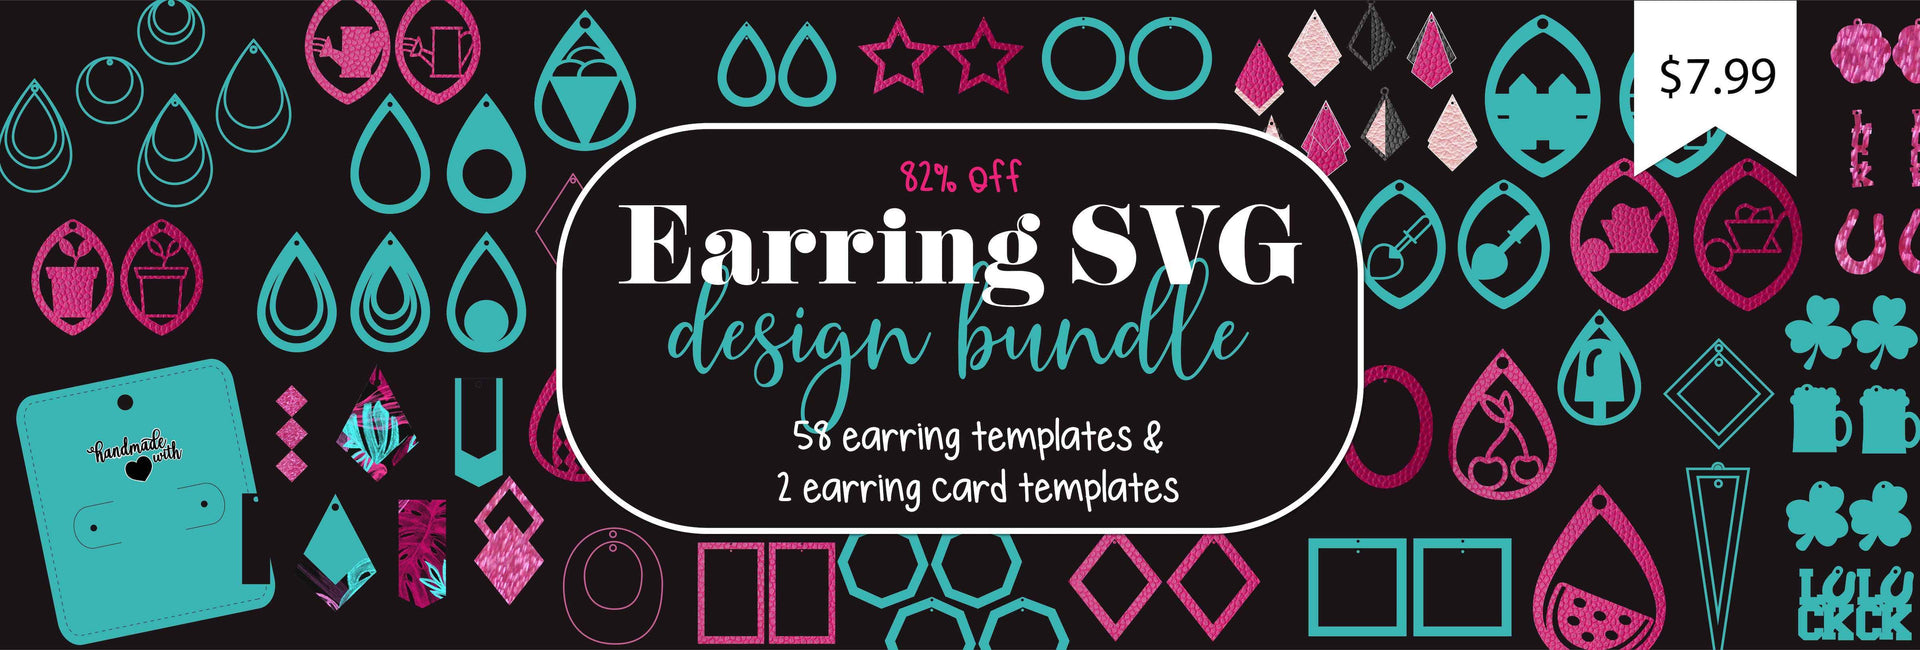 Download Earring Svg Bundle Free Commercial Use License So Fontsy